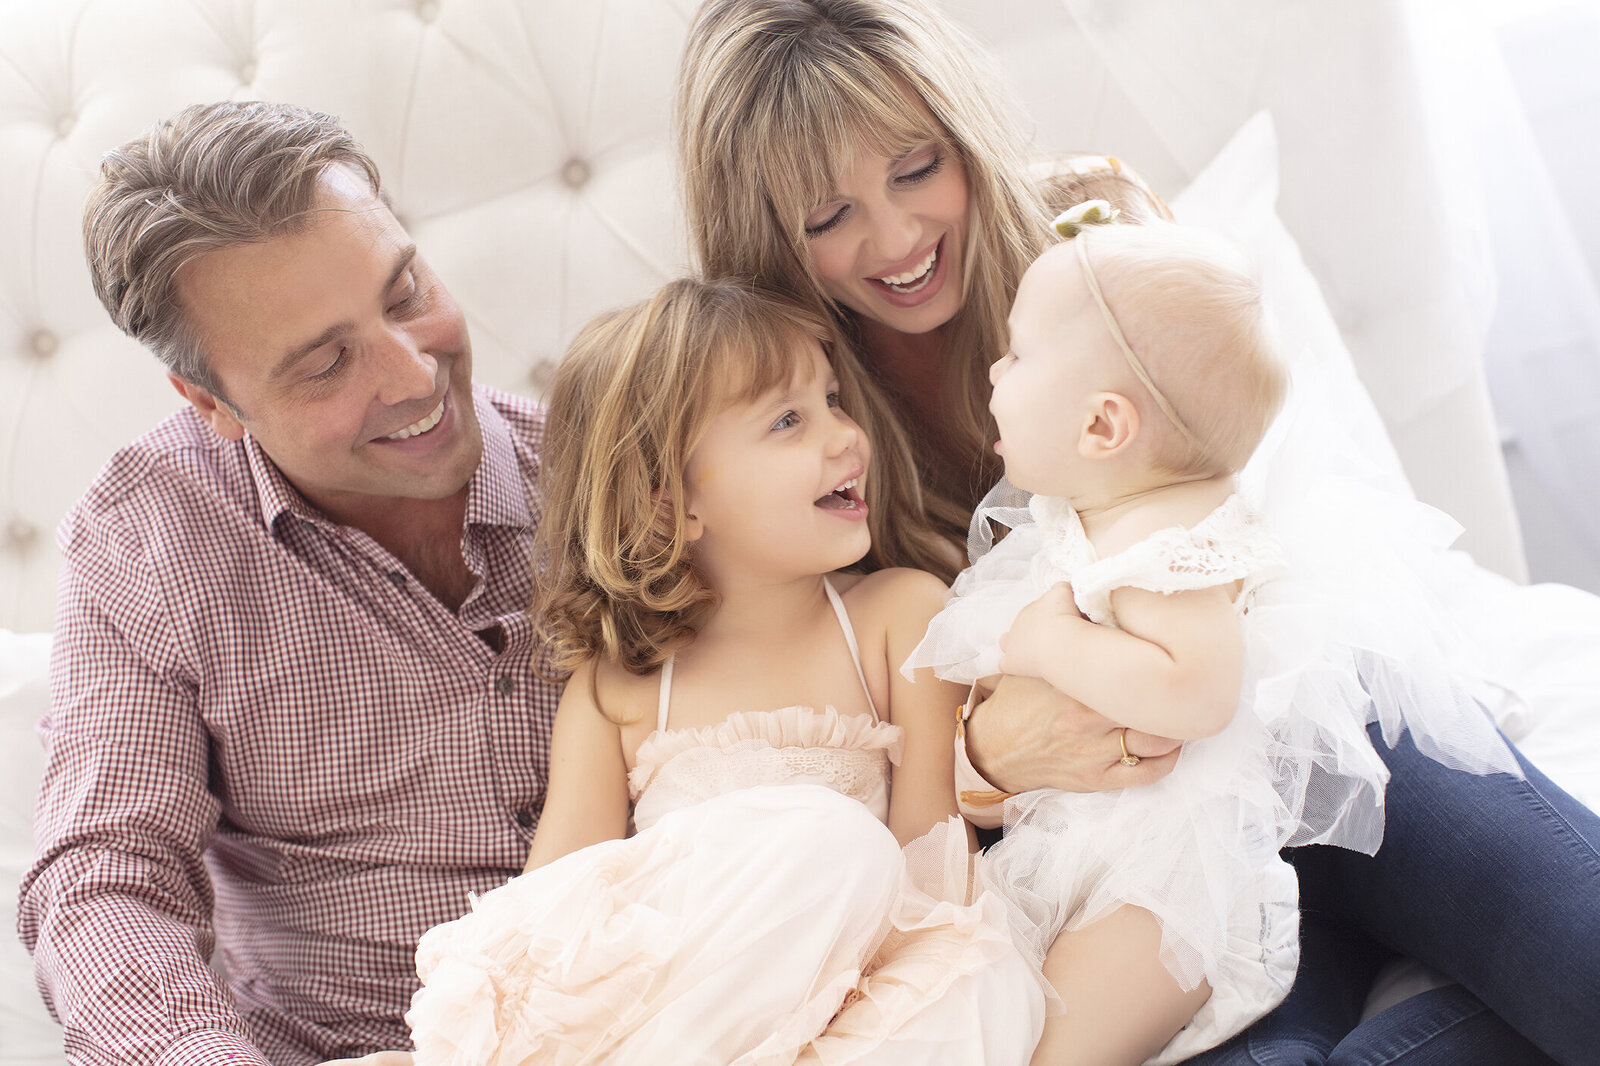 Plano Family laughing with baby at indoor photography studio